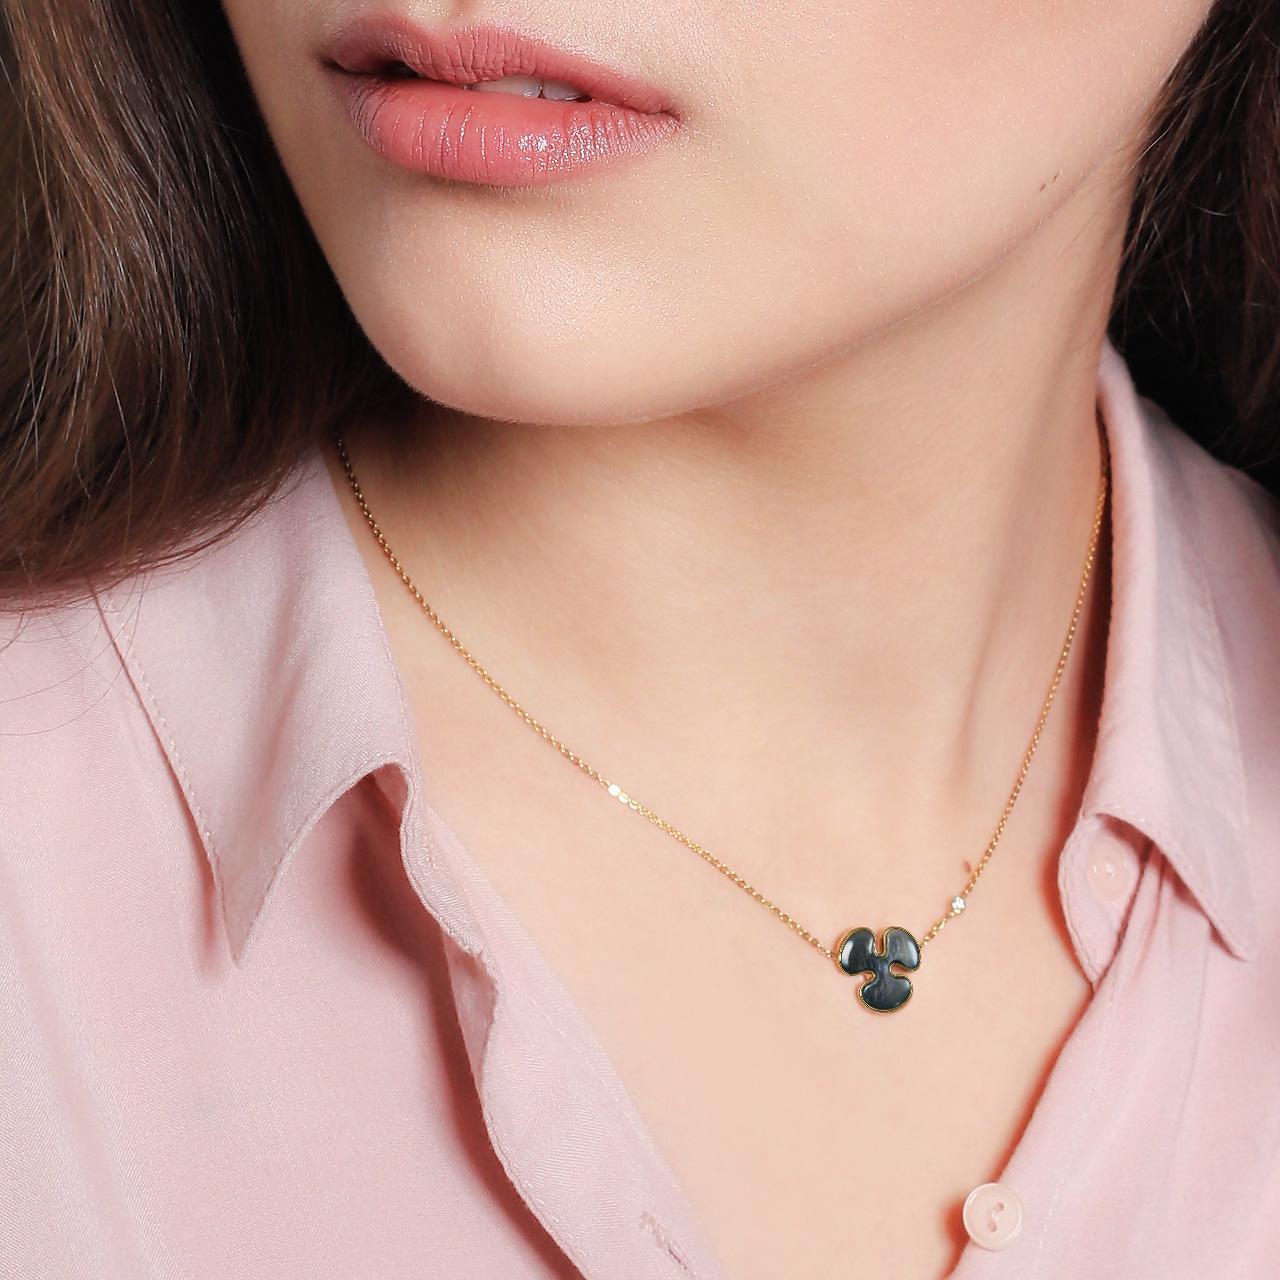 - 1 Round Diamond - 0,04 ct, E-F/ VS
- 1 Black Mother-of-pearl
- 14K Yellow Gold 
- Weight: 2,41 g
- Length: 42,5 cm
Delicate necklace on a thin chain, in the shape of a shamrock, decorated with black mother-of-pearl with silky sheen and diamond